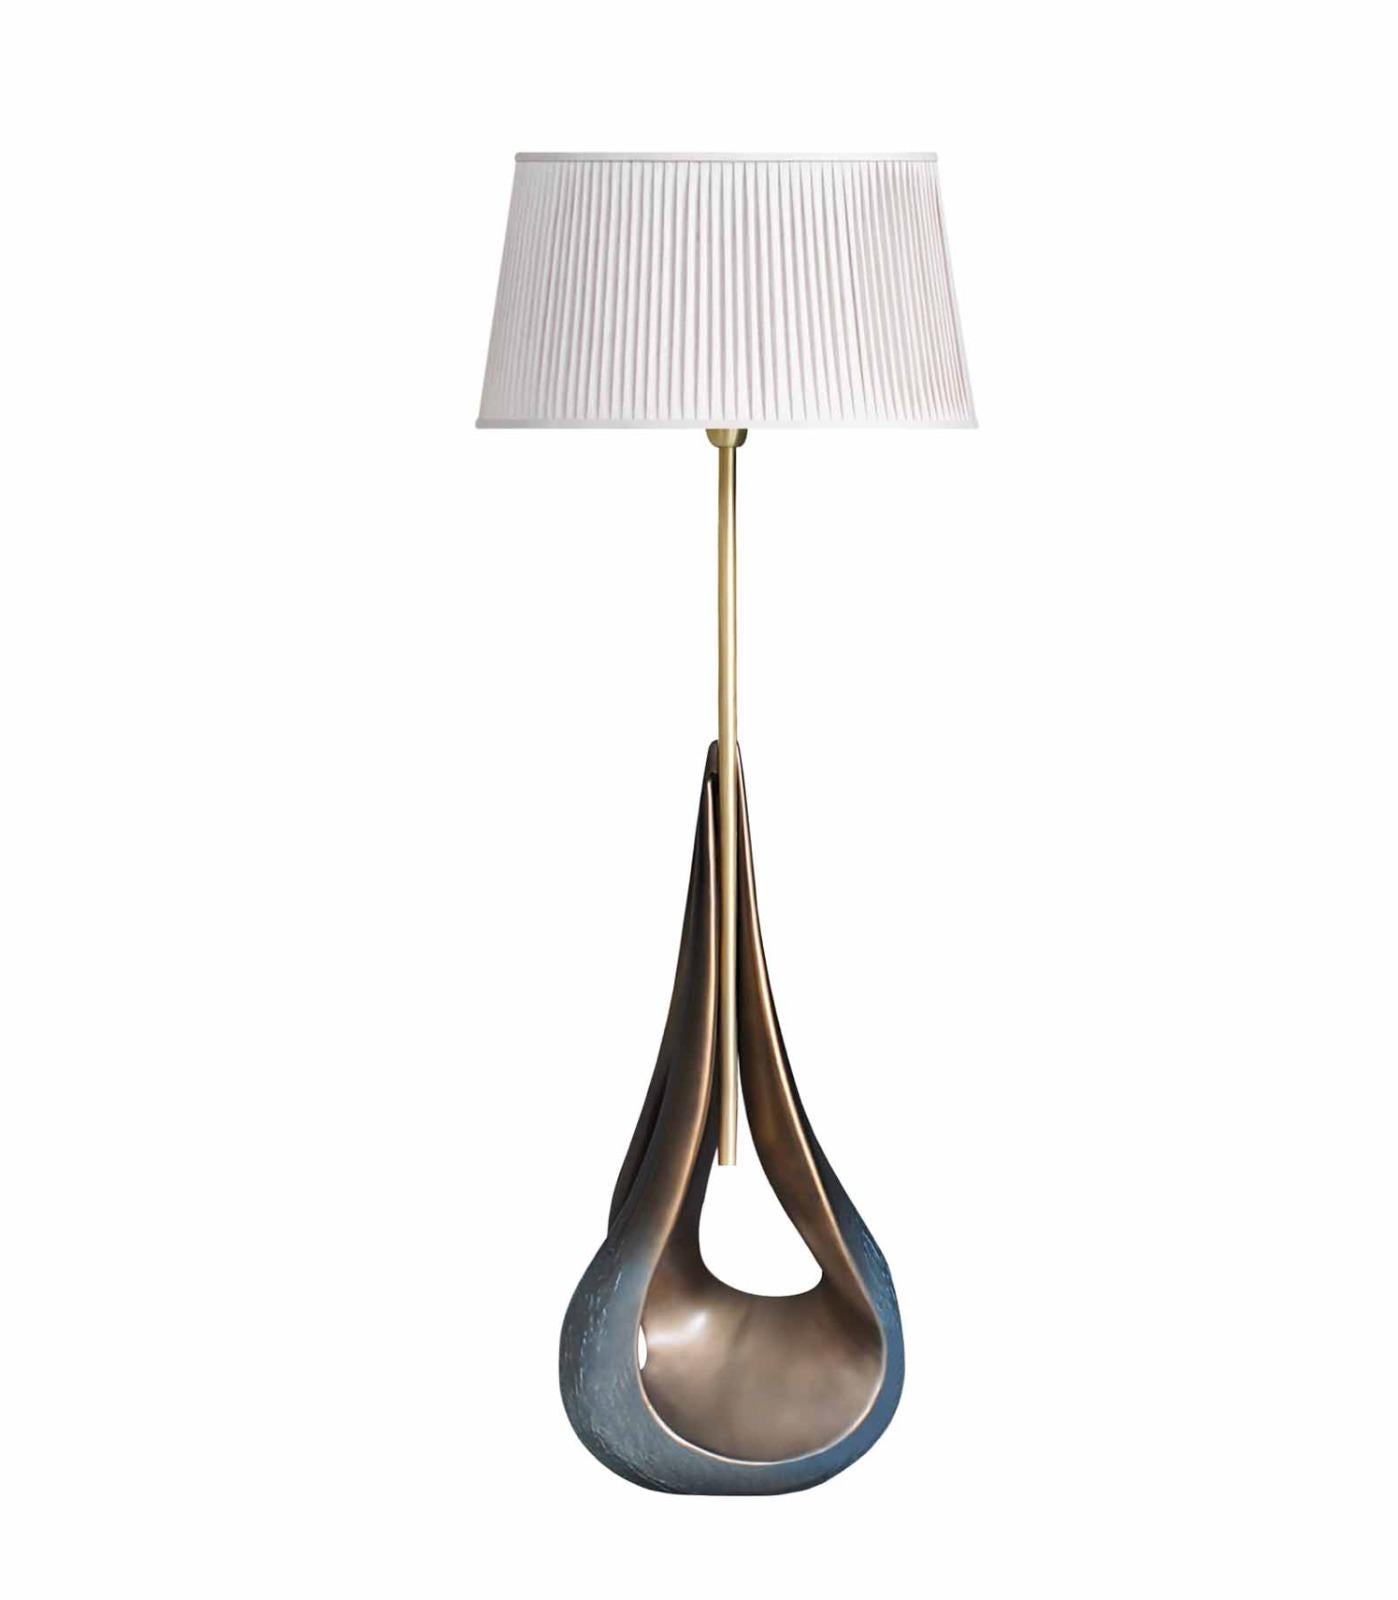 Modern New Floor Lamp in Resin finished in Brass Color For Sale